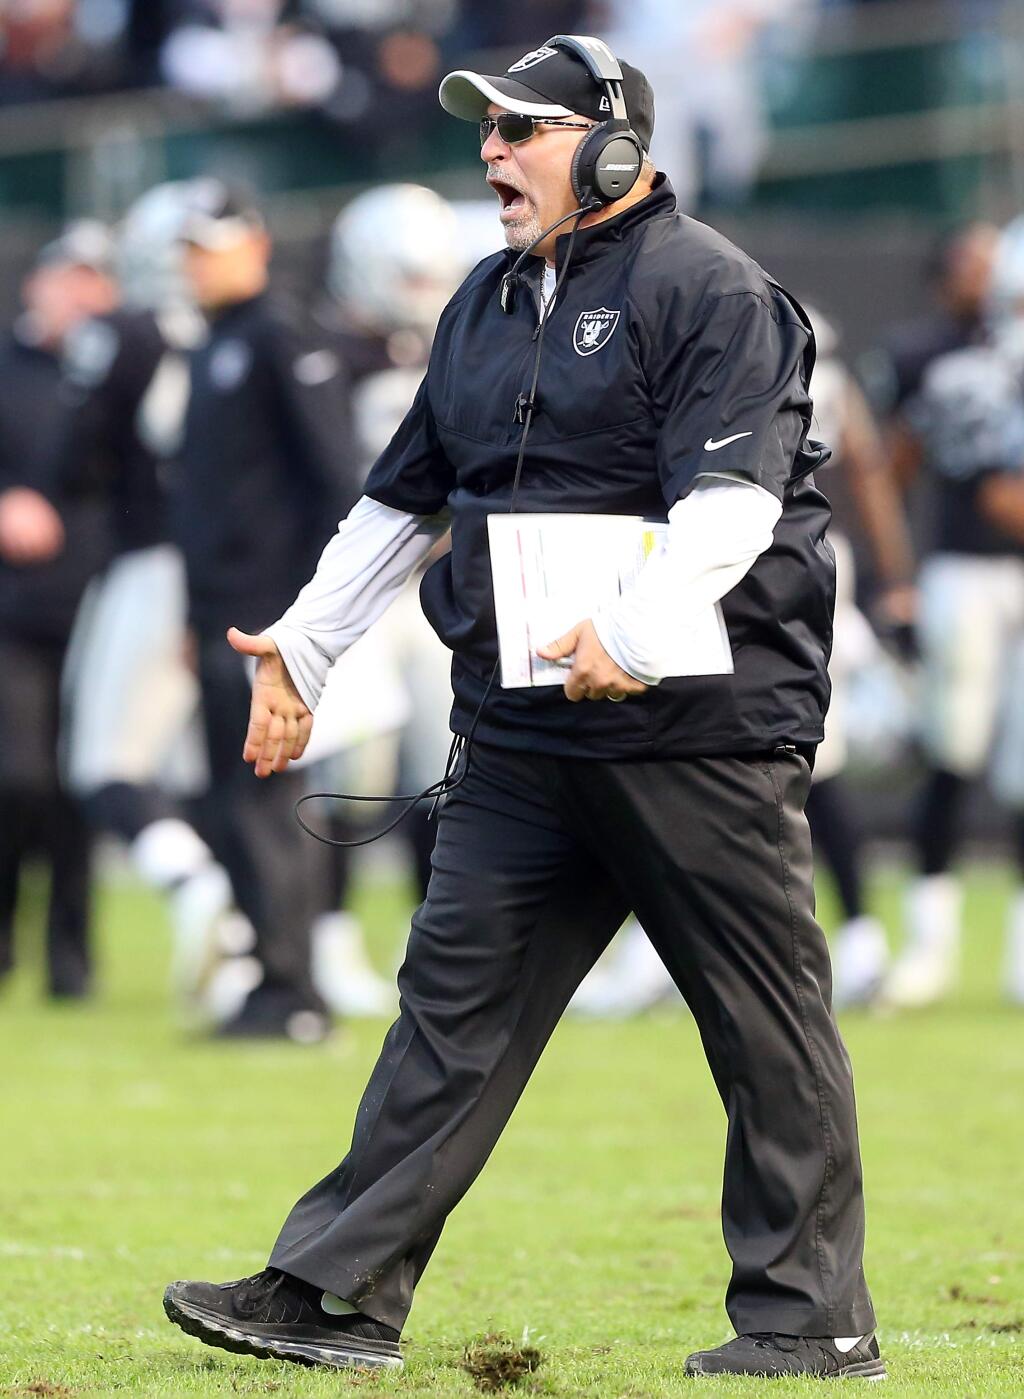 Oakland Raiders interim coach Tony Sparano coaches his team against the Buffalo Bills in Oakland on Sunday, December 21, 2014. The Raiders defeated the Bills 26-24.(Christopher Chung/ The Press Democrat)